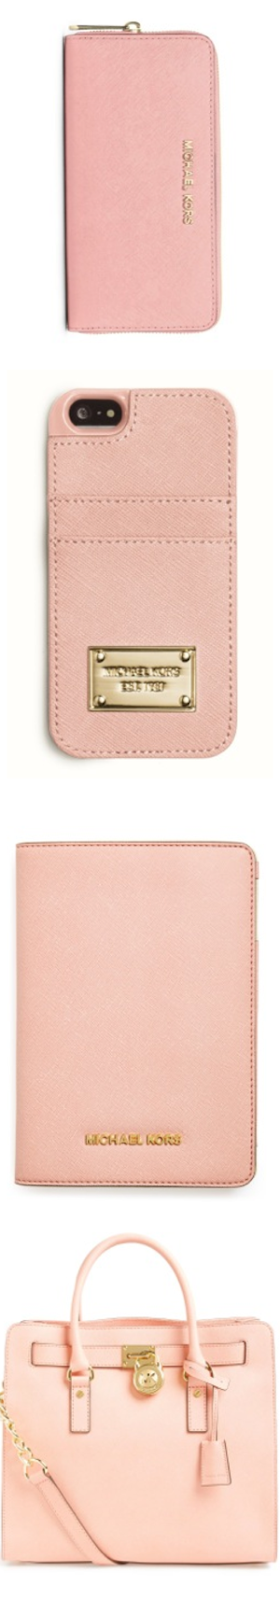 Michael Kors Accessories in Pink Color